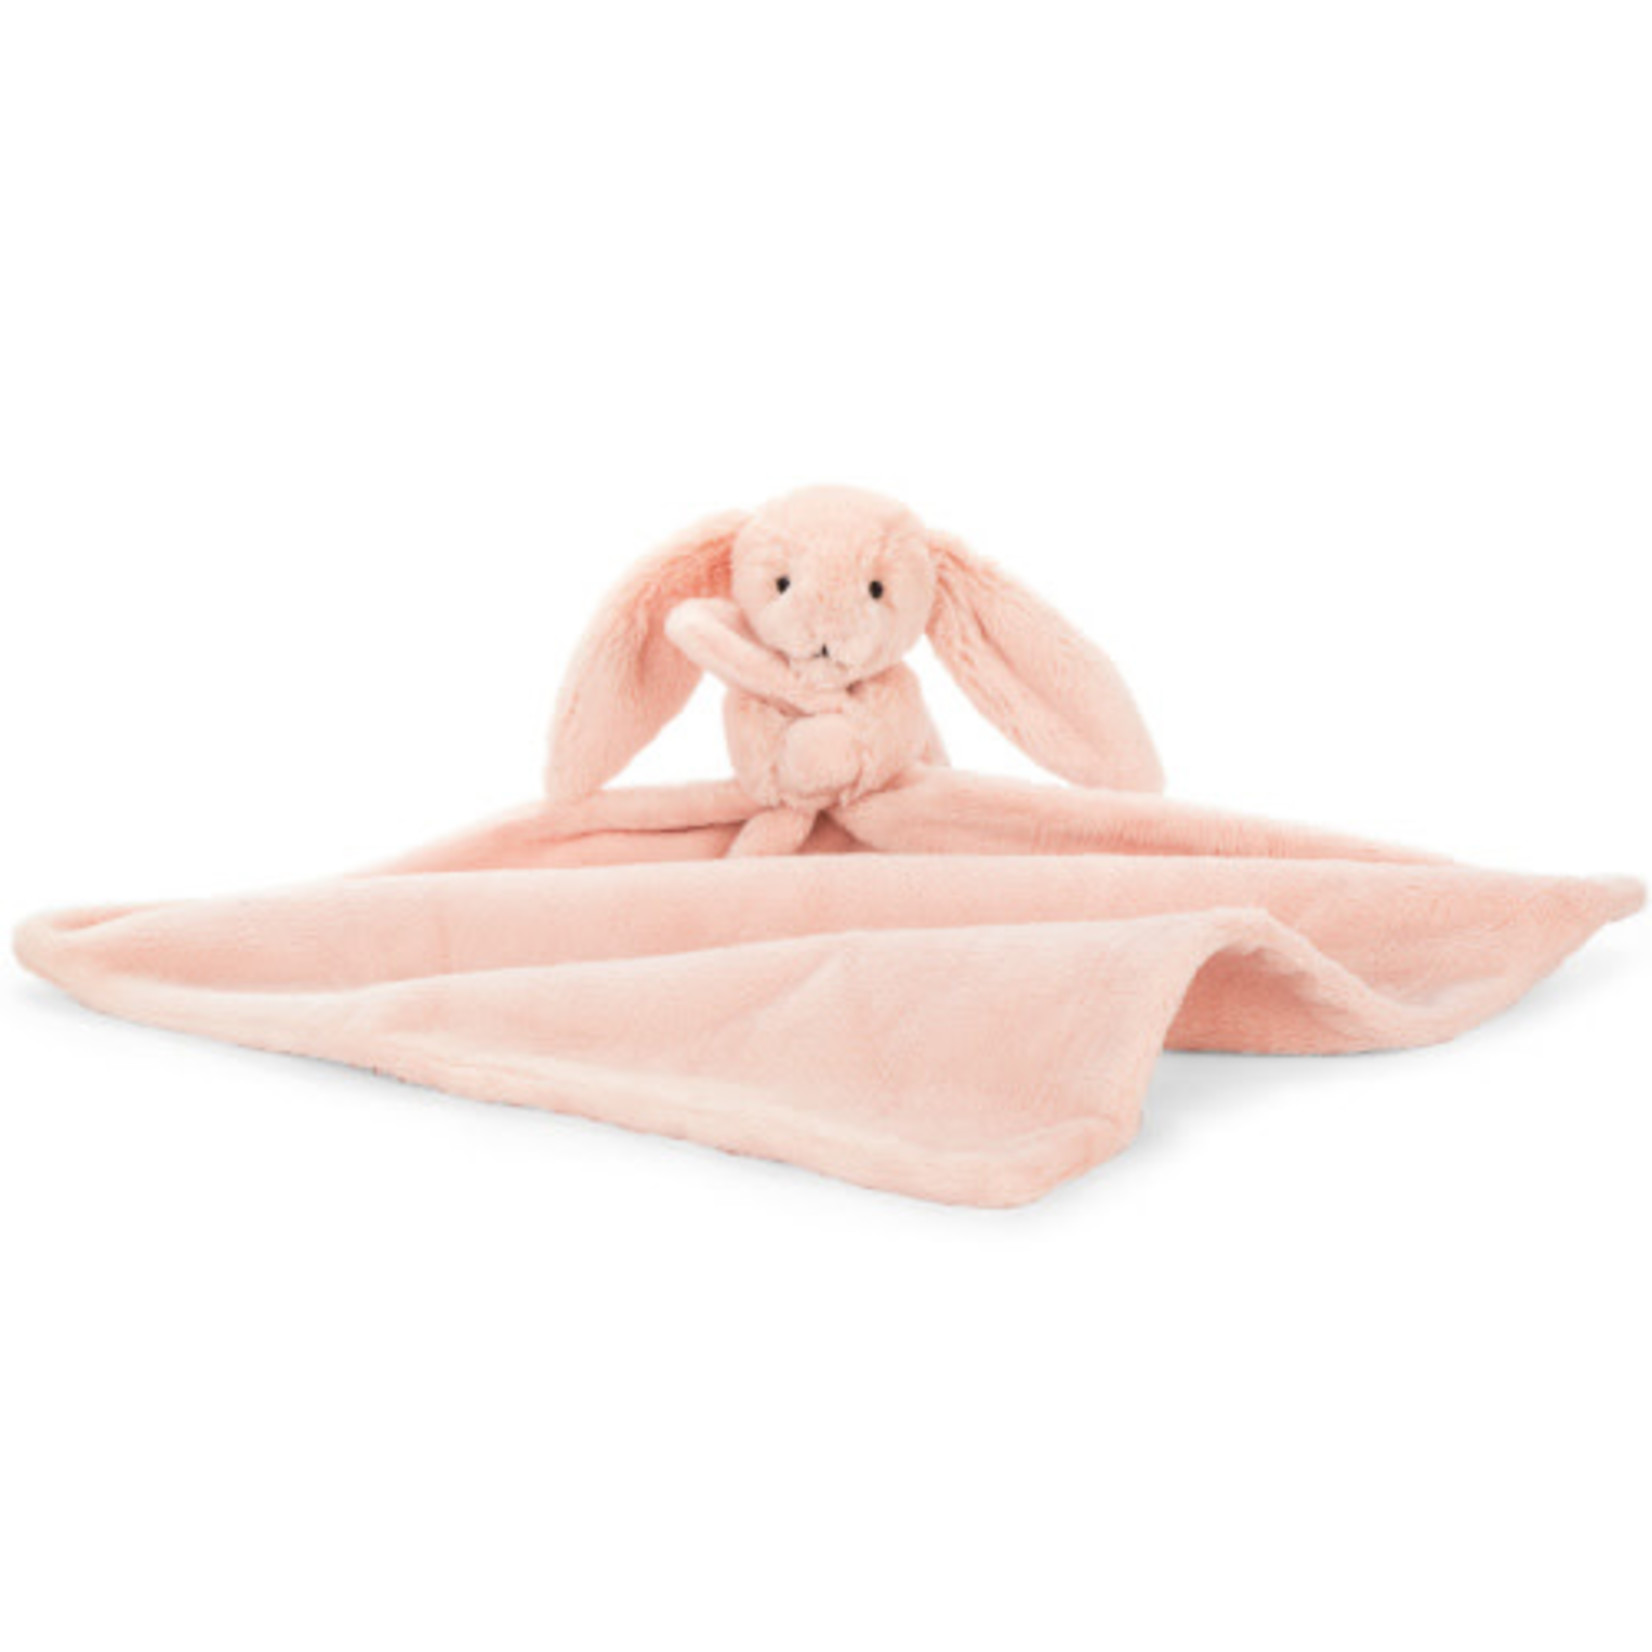 JELLYCAT BASHFUL BLUSH BUNNY SOOTHER